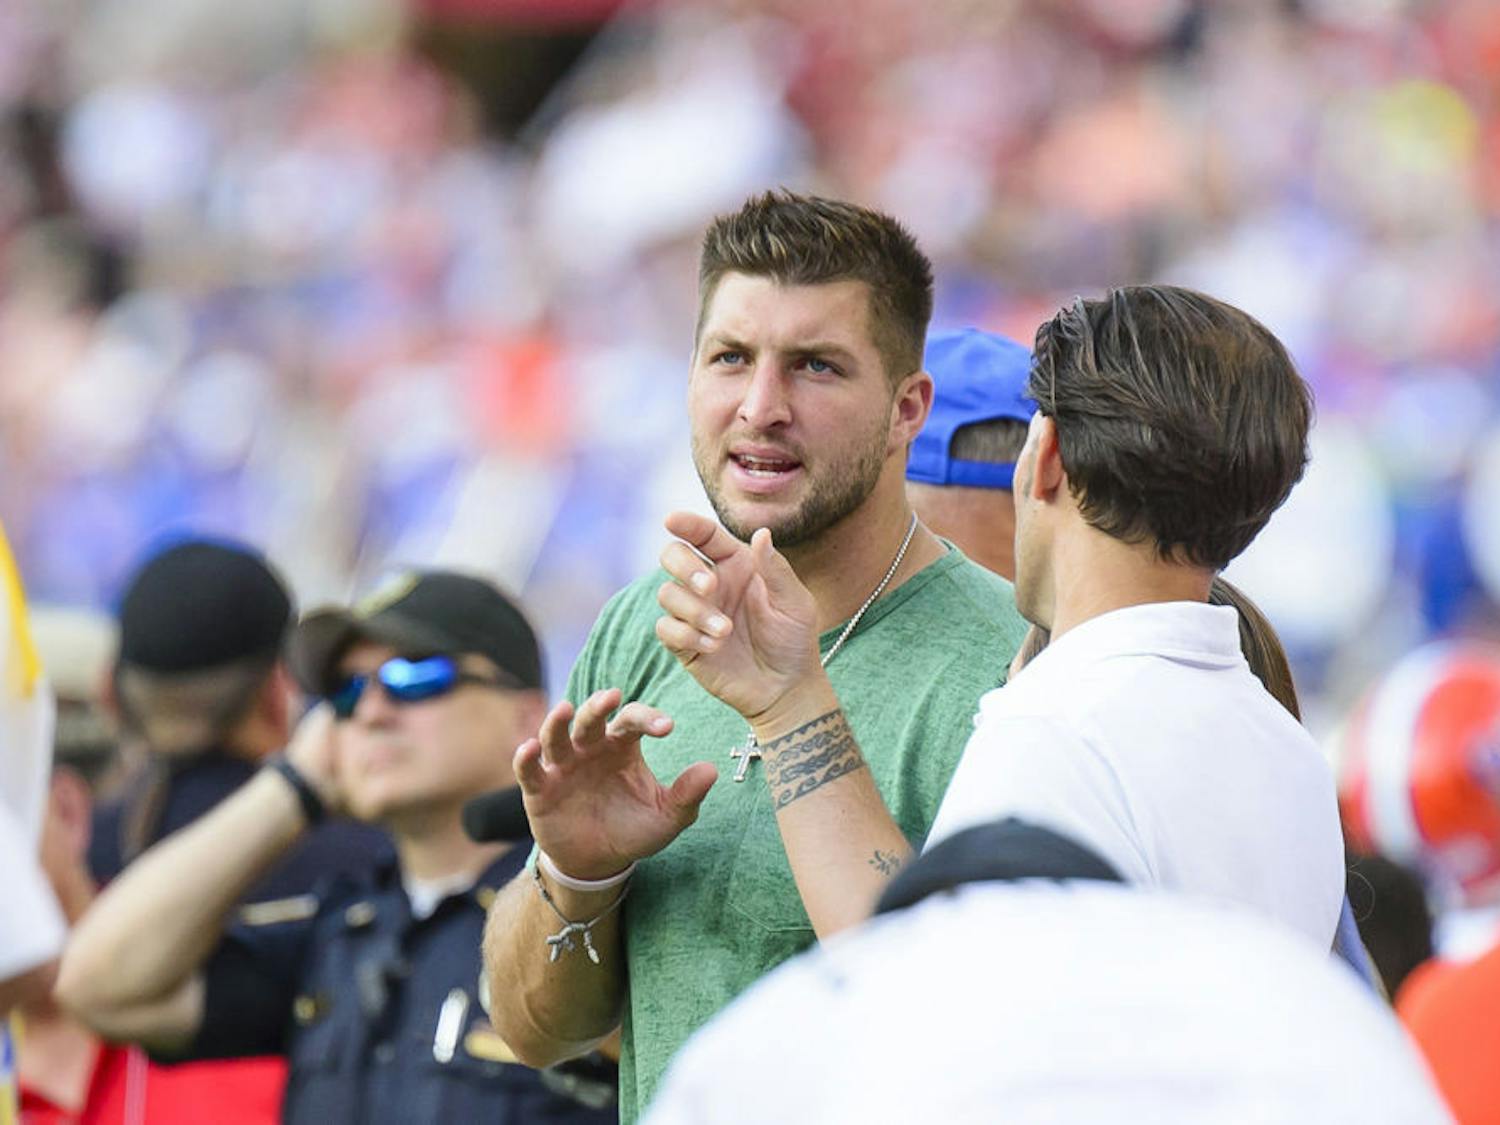 Tim Tebow on the sidelines&nbsp;during Florida's 42-21 loss to Alabama at Bryant-Denny Stadium on Sept. 20, 2014.